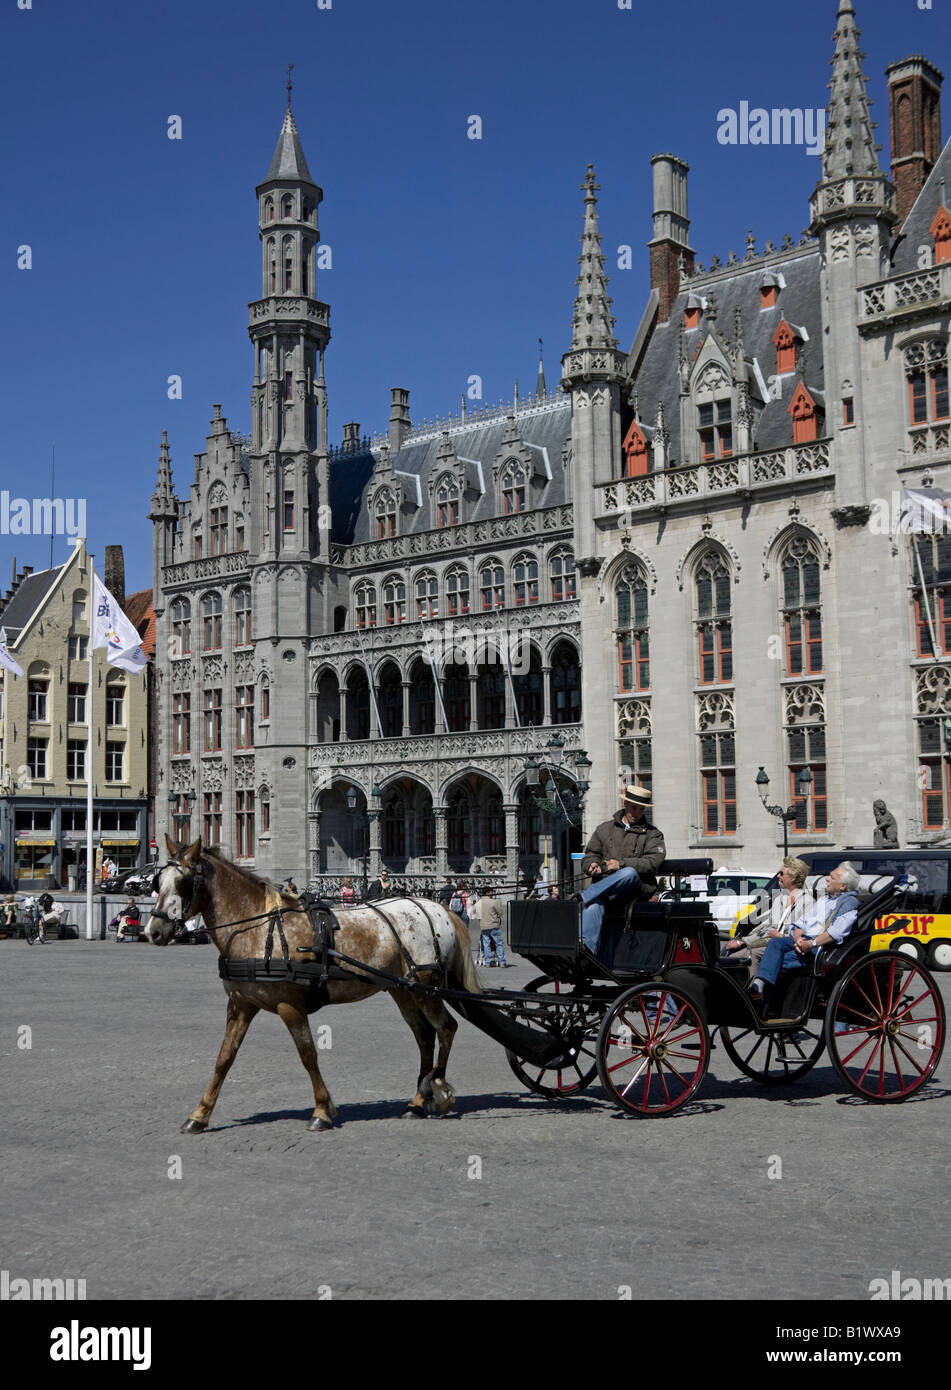 Sightseeing by horse-drawn carriage, Markt, Bruges, Flanders, Europe Stock Photo